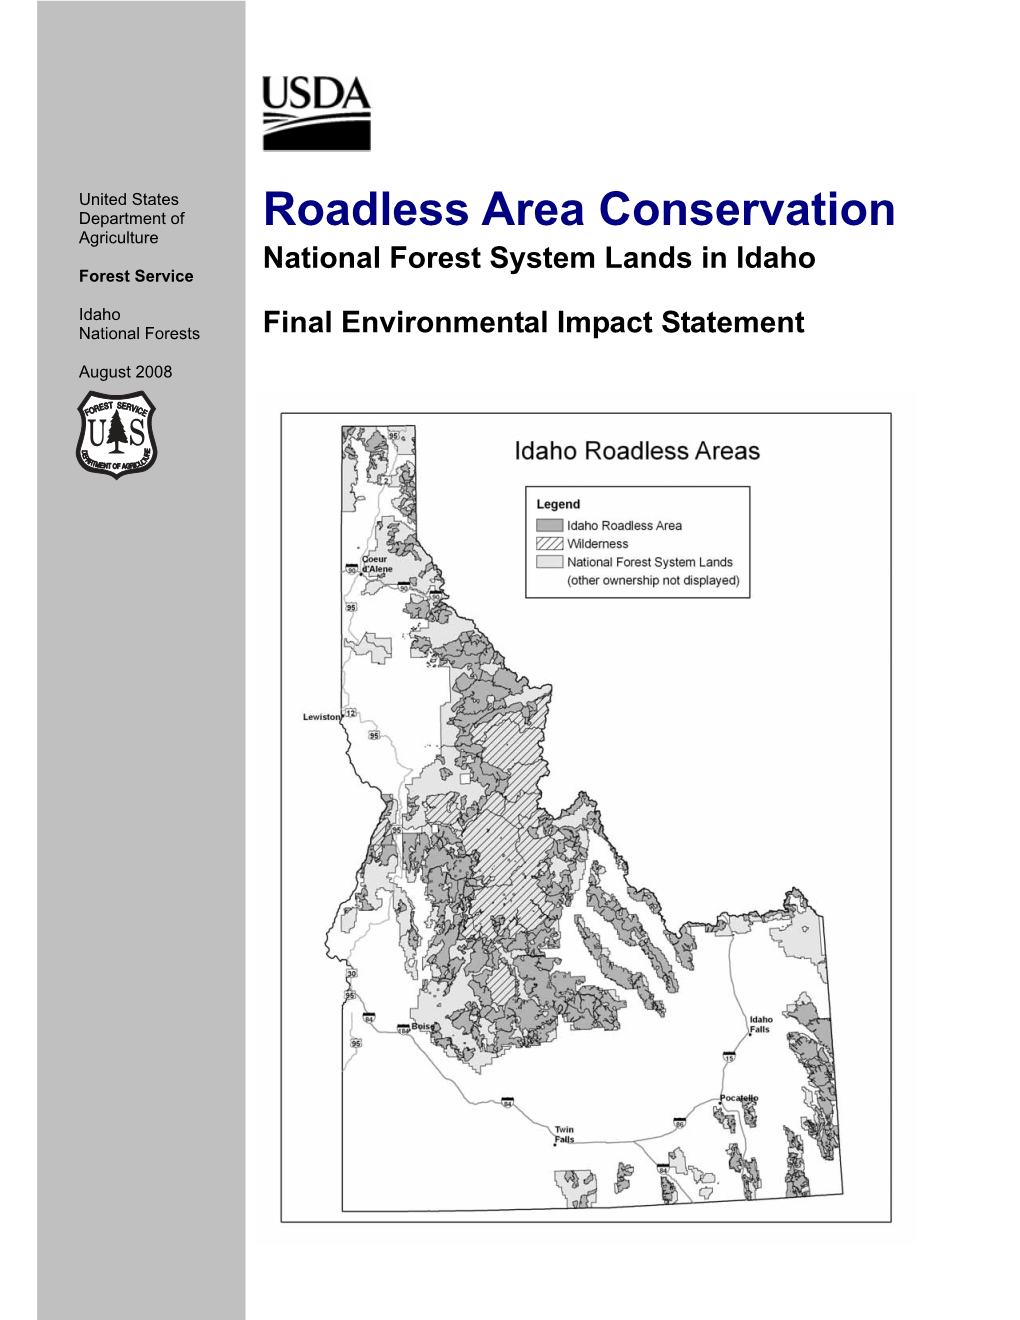 Roadless Area Conservation; National Forest Systems Land in Idaho FEIS